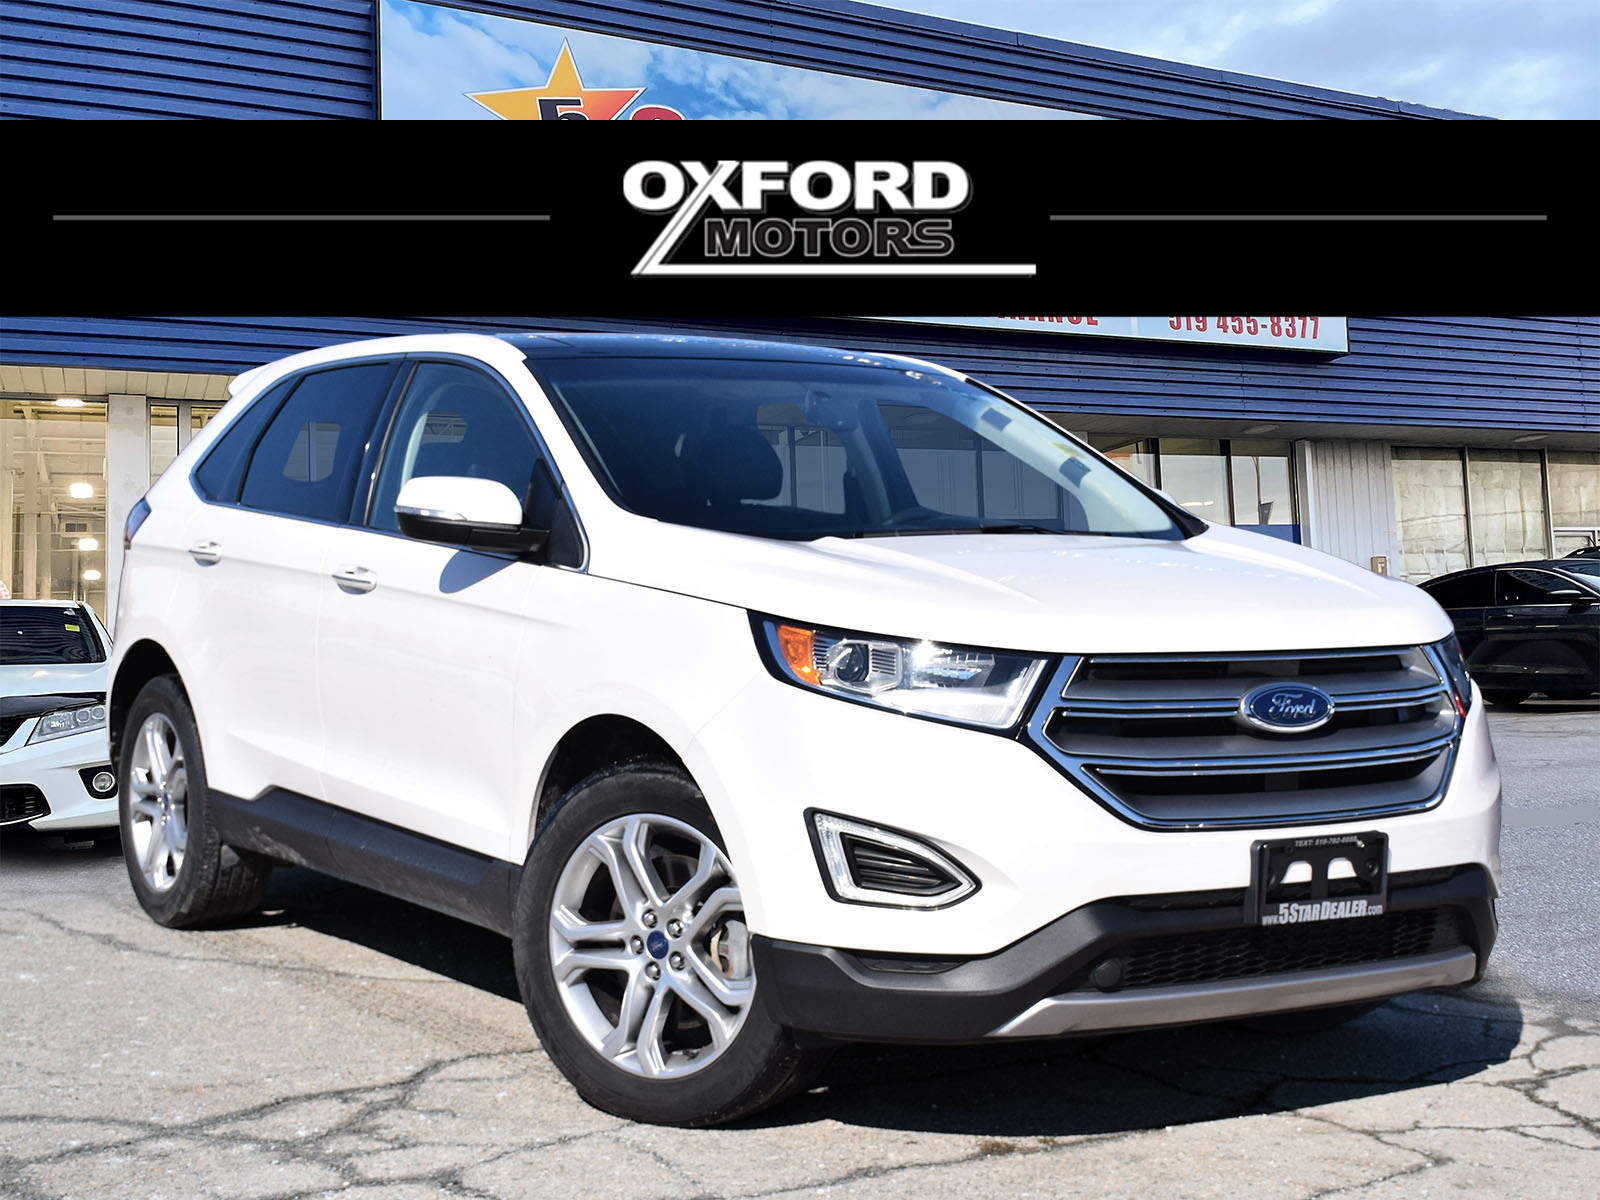 2018 Ford Edge NAV LEATHER PANO ROOF LOADED WE FINANCE ALL CREDIT